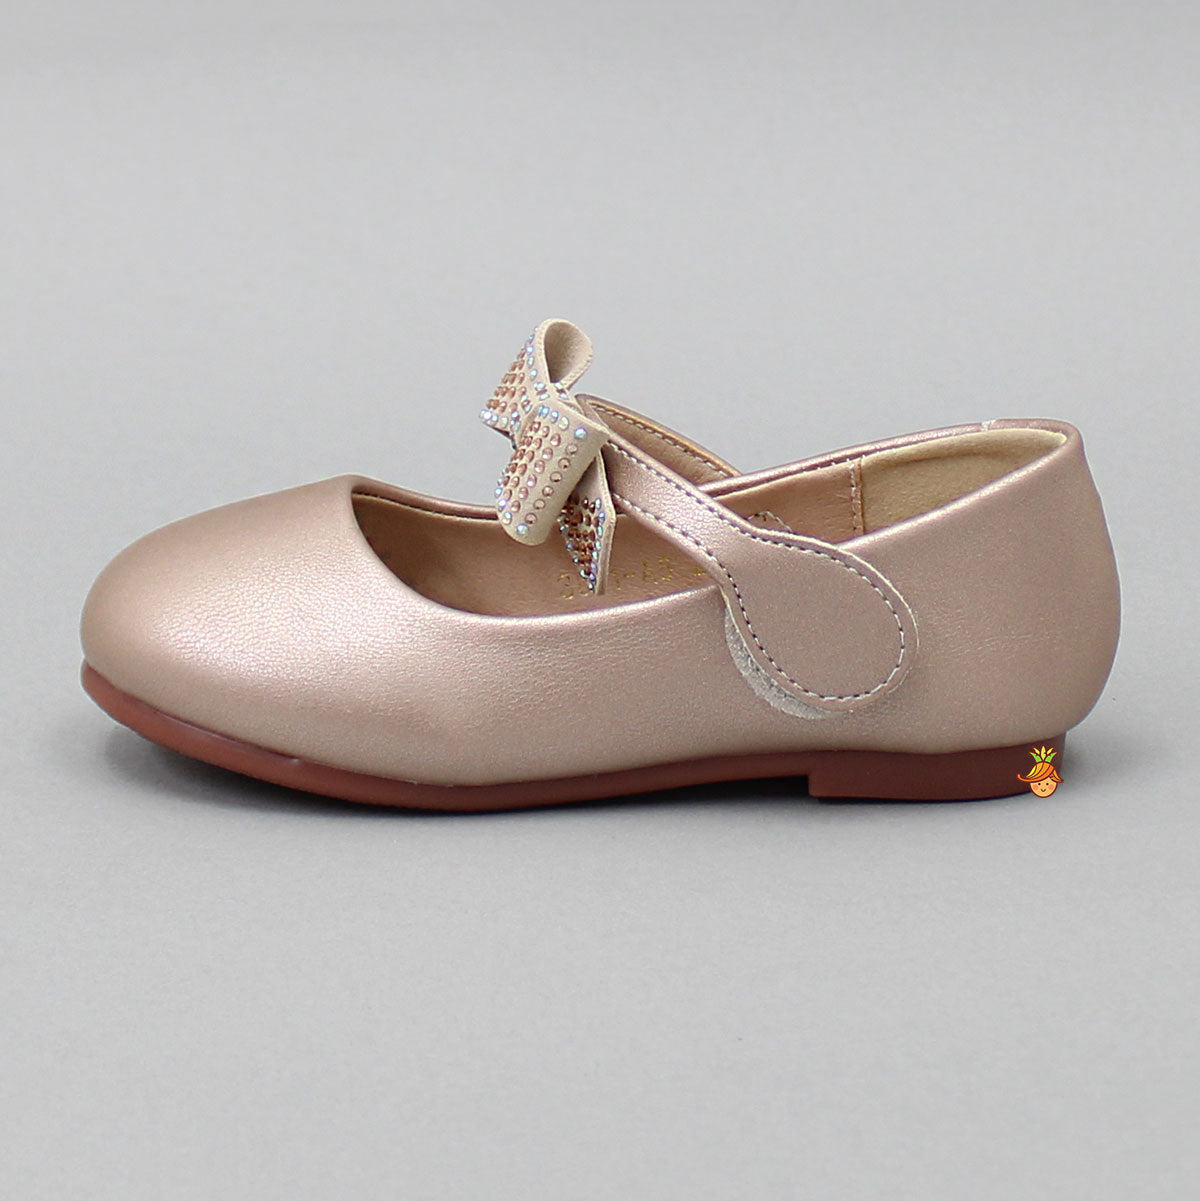 Tiny Bow Adorned Beige Shoes